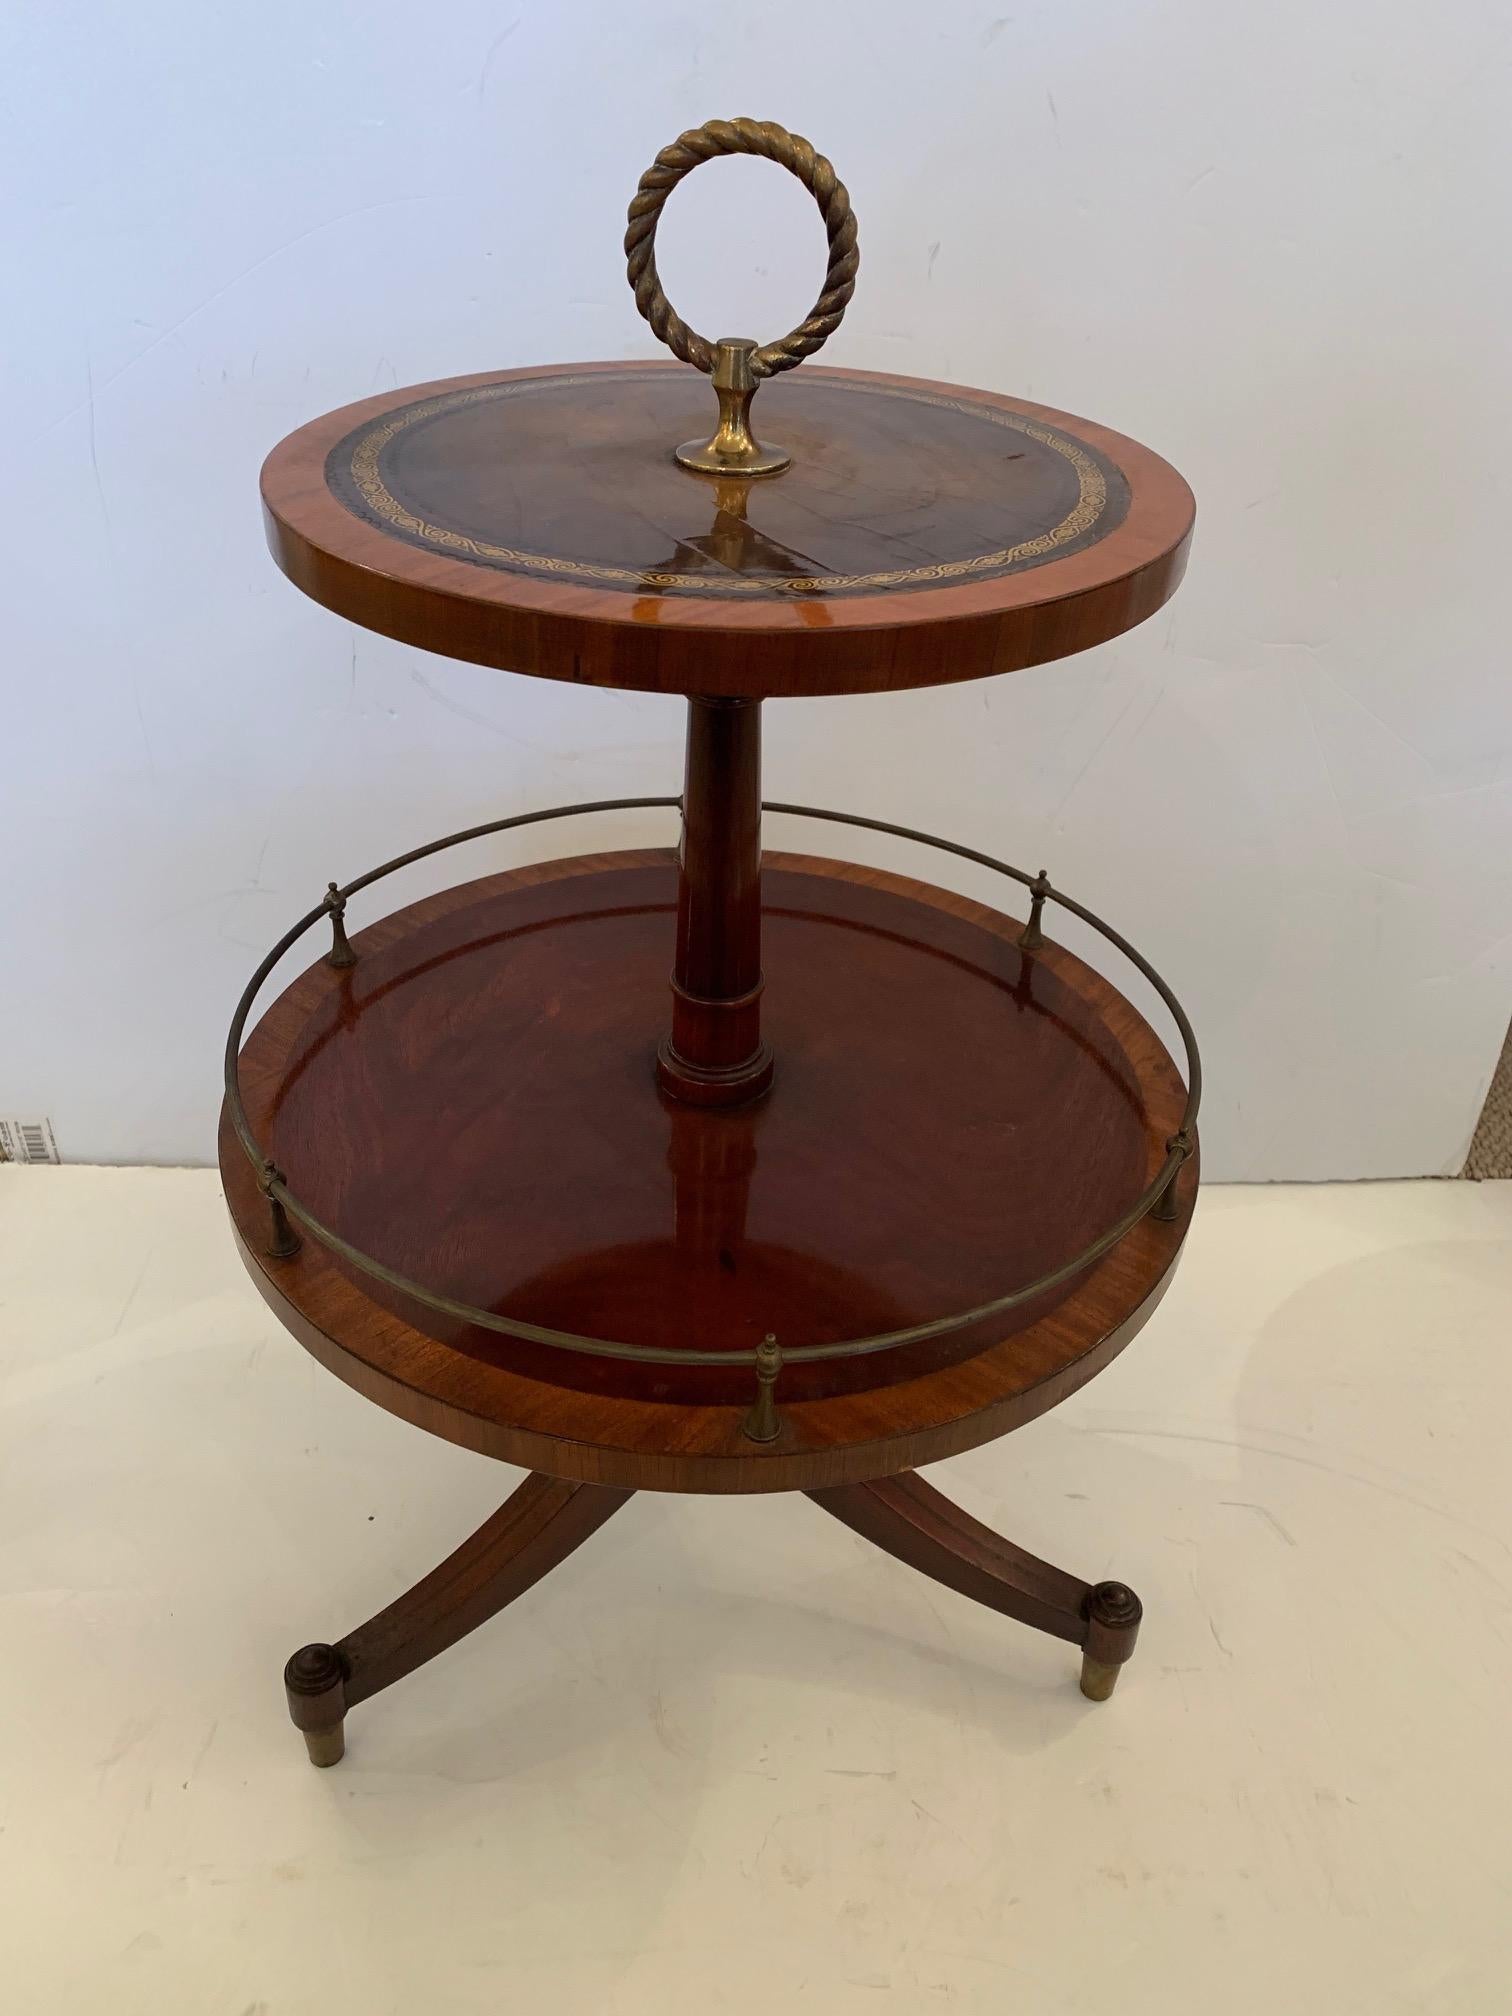 Charming Two-Tier Antique Mahogany and Tooled Leather Side Table In Excellent Condition For Sale In Hopewell, NJ